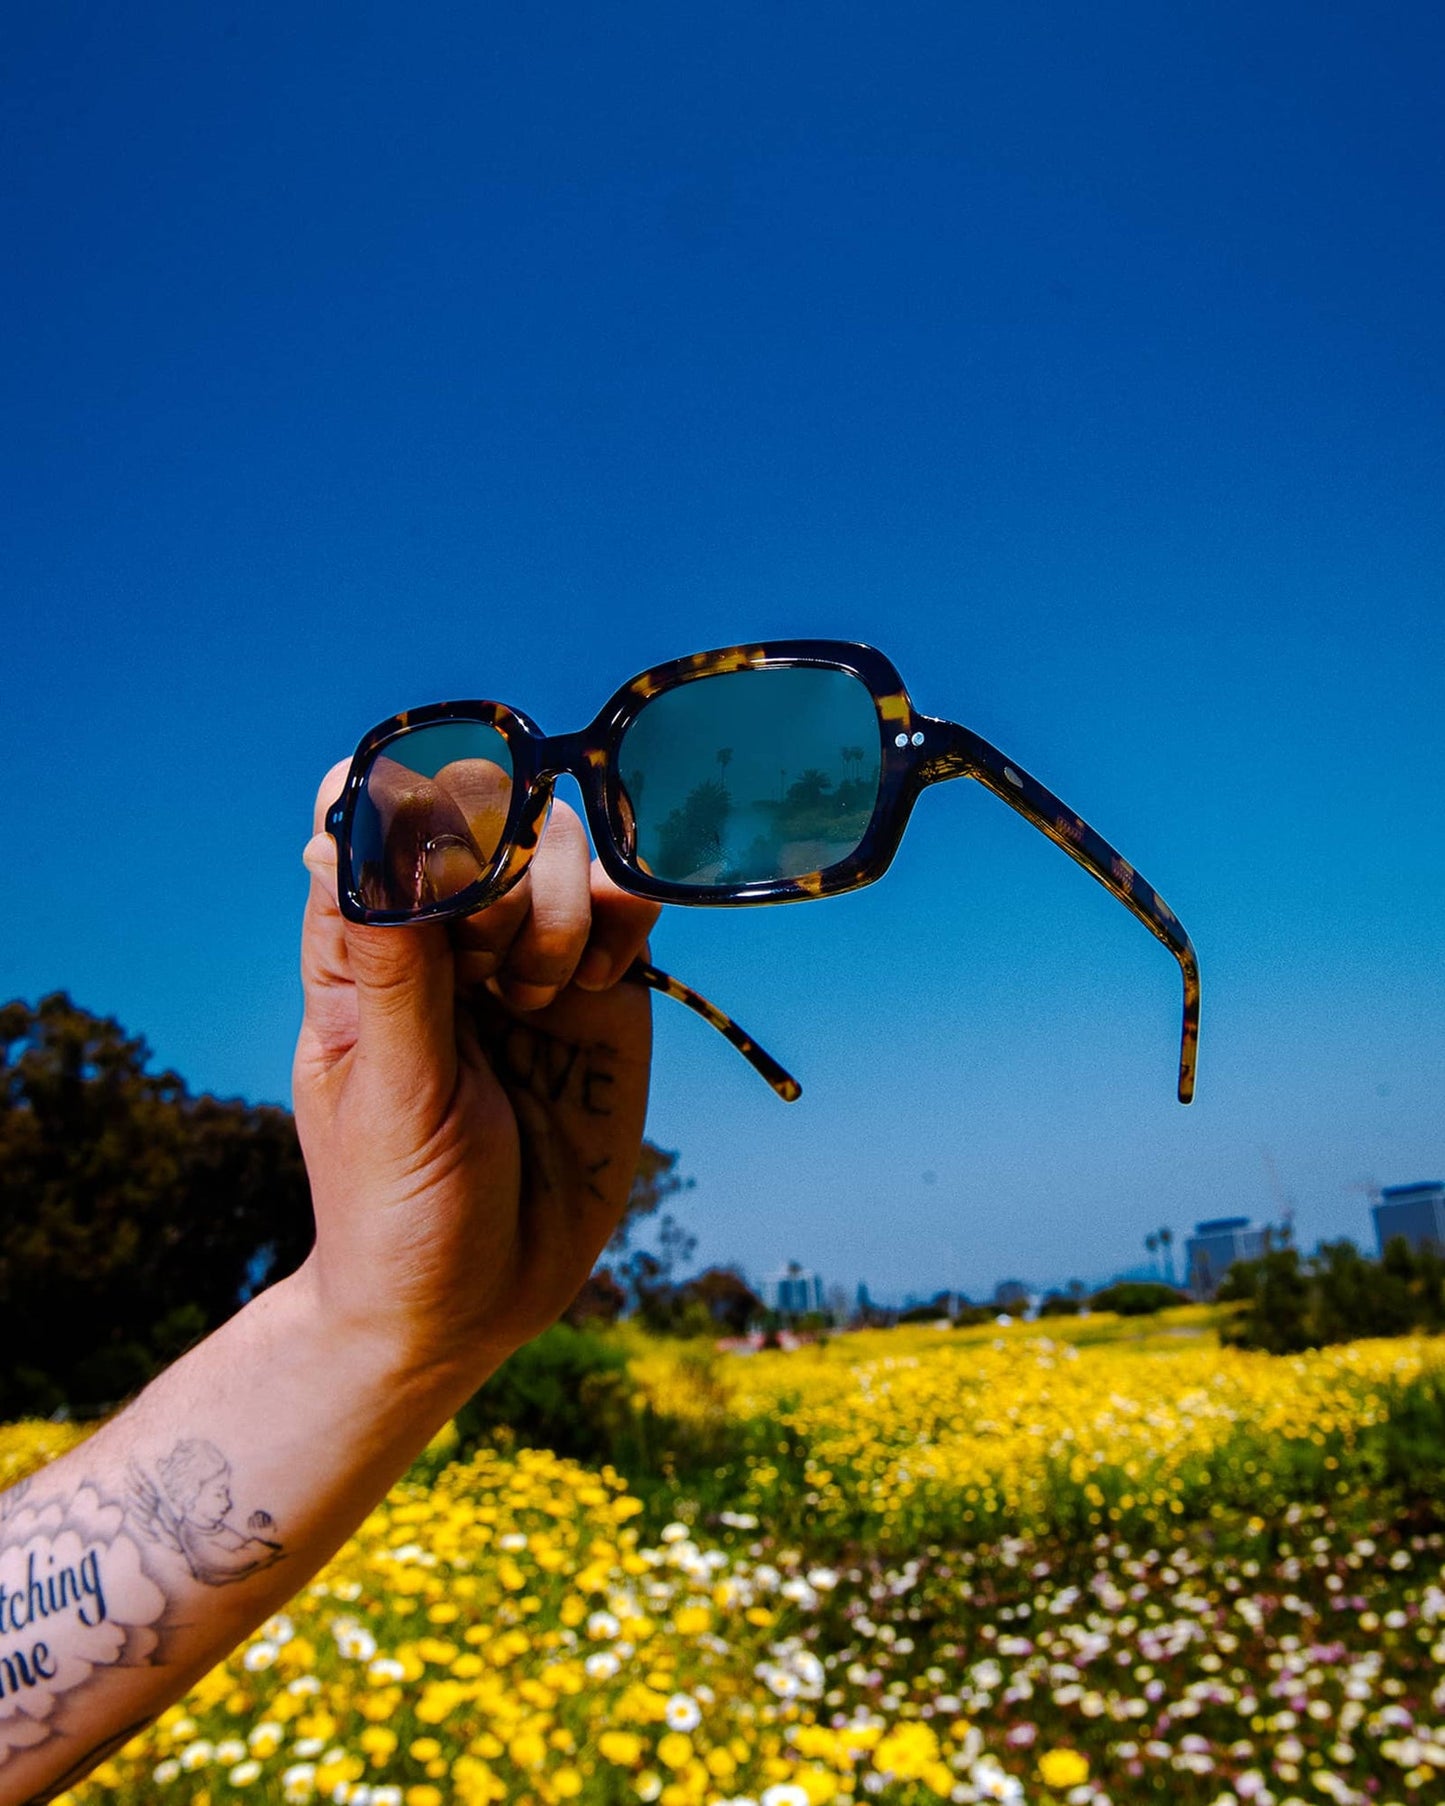 The Dream Cassette is a lightweight frame that looks great on everyone. Thin, adjustable temples make for a comfortable fit on a wide range of head sizes. Handcrafted bioacetate frames—biodegradable, plant-based, earth-friendlier. Rx-ready.